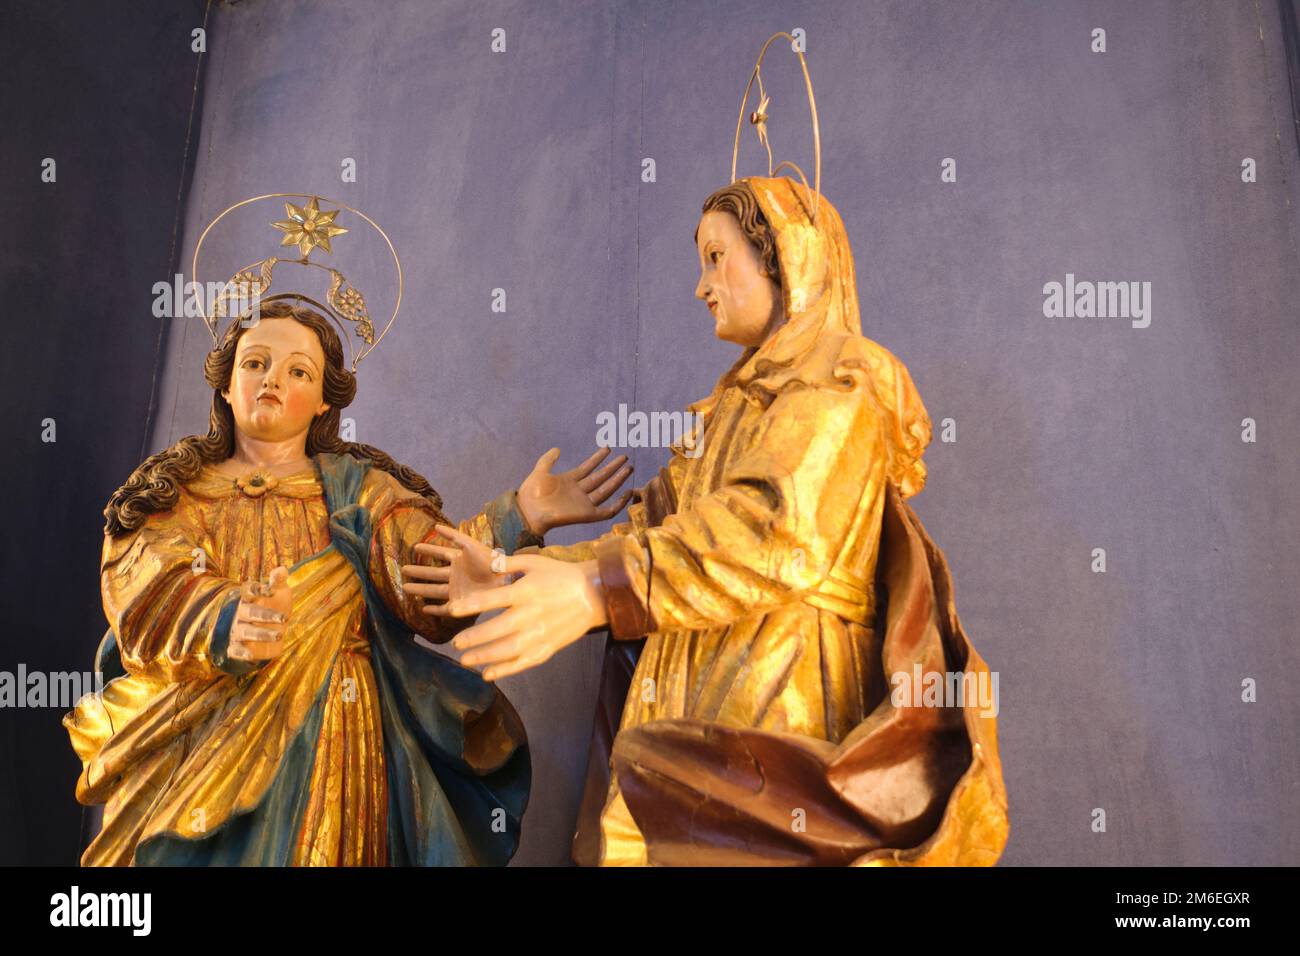 Beautiful wood carved, gold covered, fancy angels with delicate hands and halos. At the Igreja da Misericórdia museum and Catholic church landmark in Stock Photo